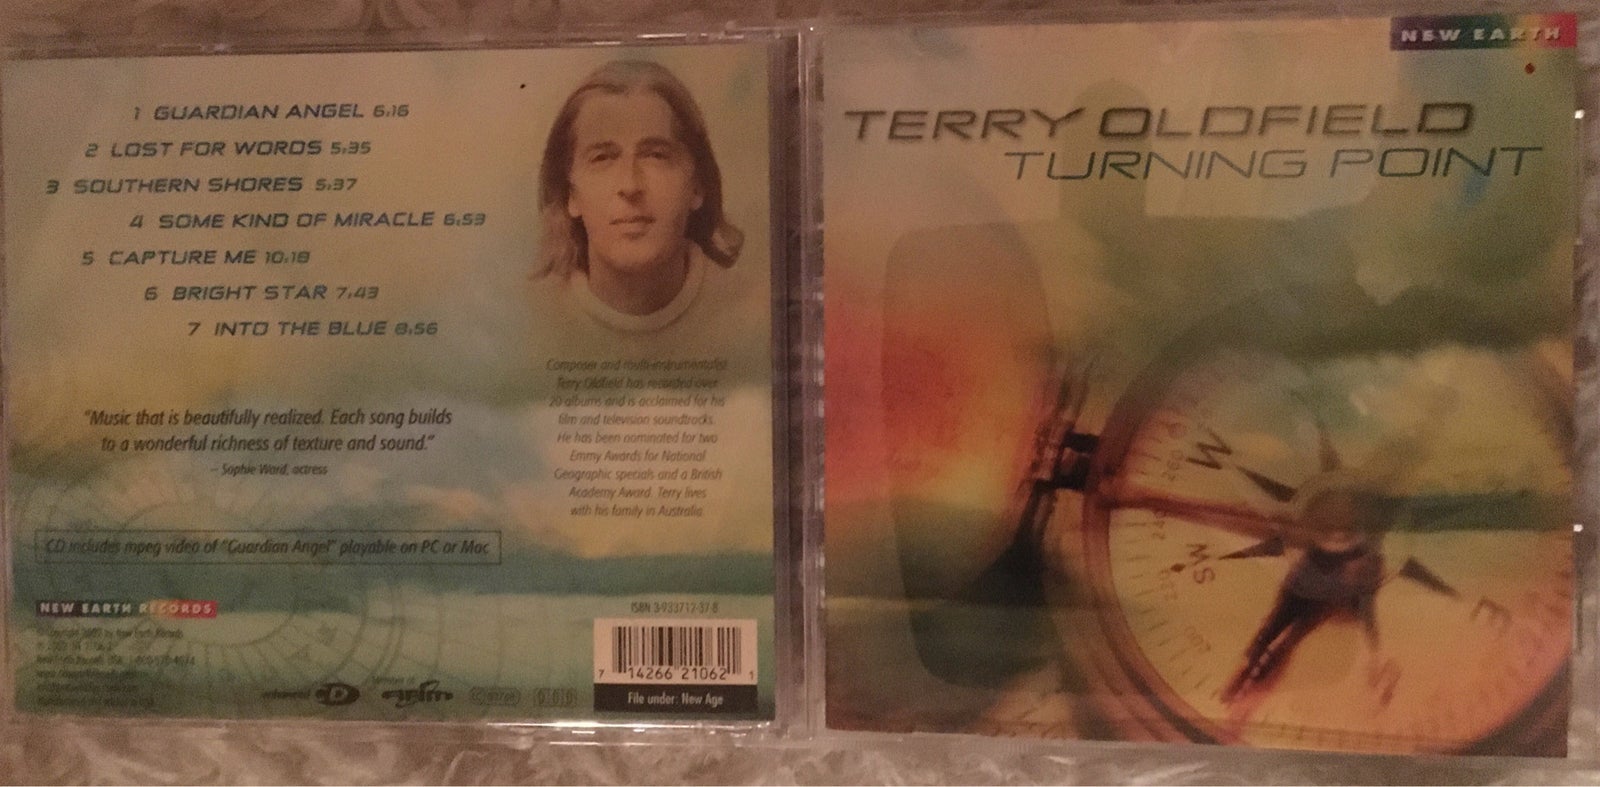 Terry Oldfield: Turning Point, folk